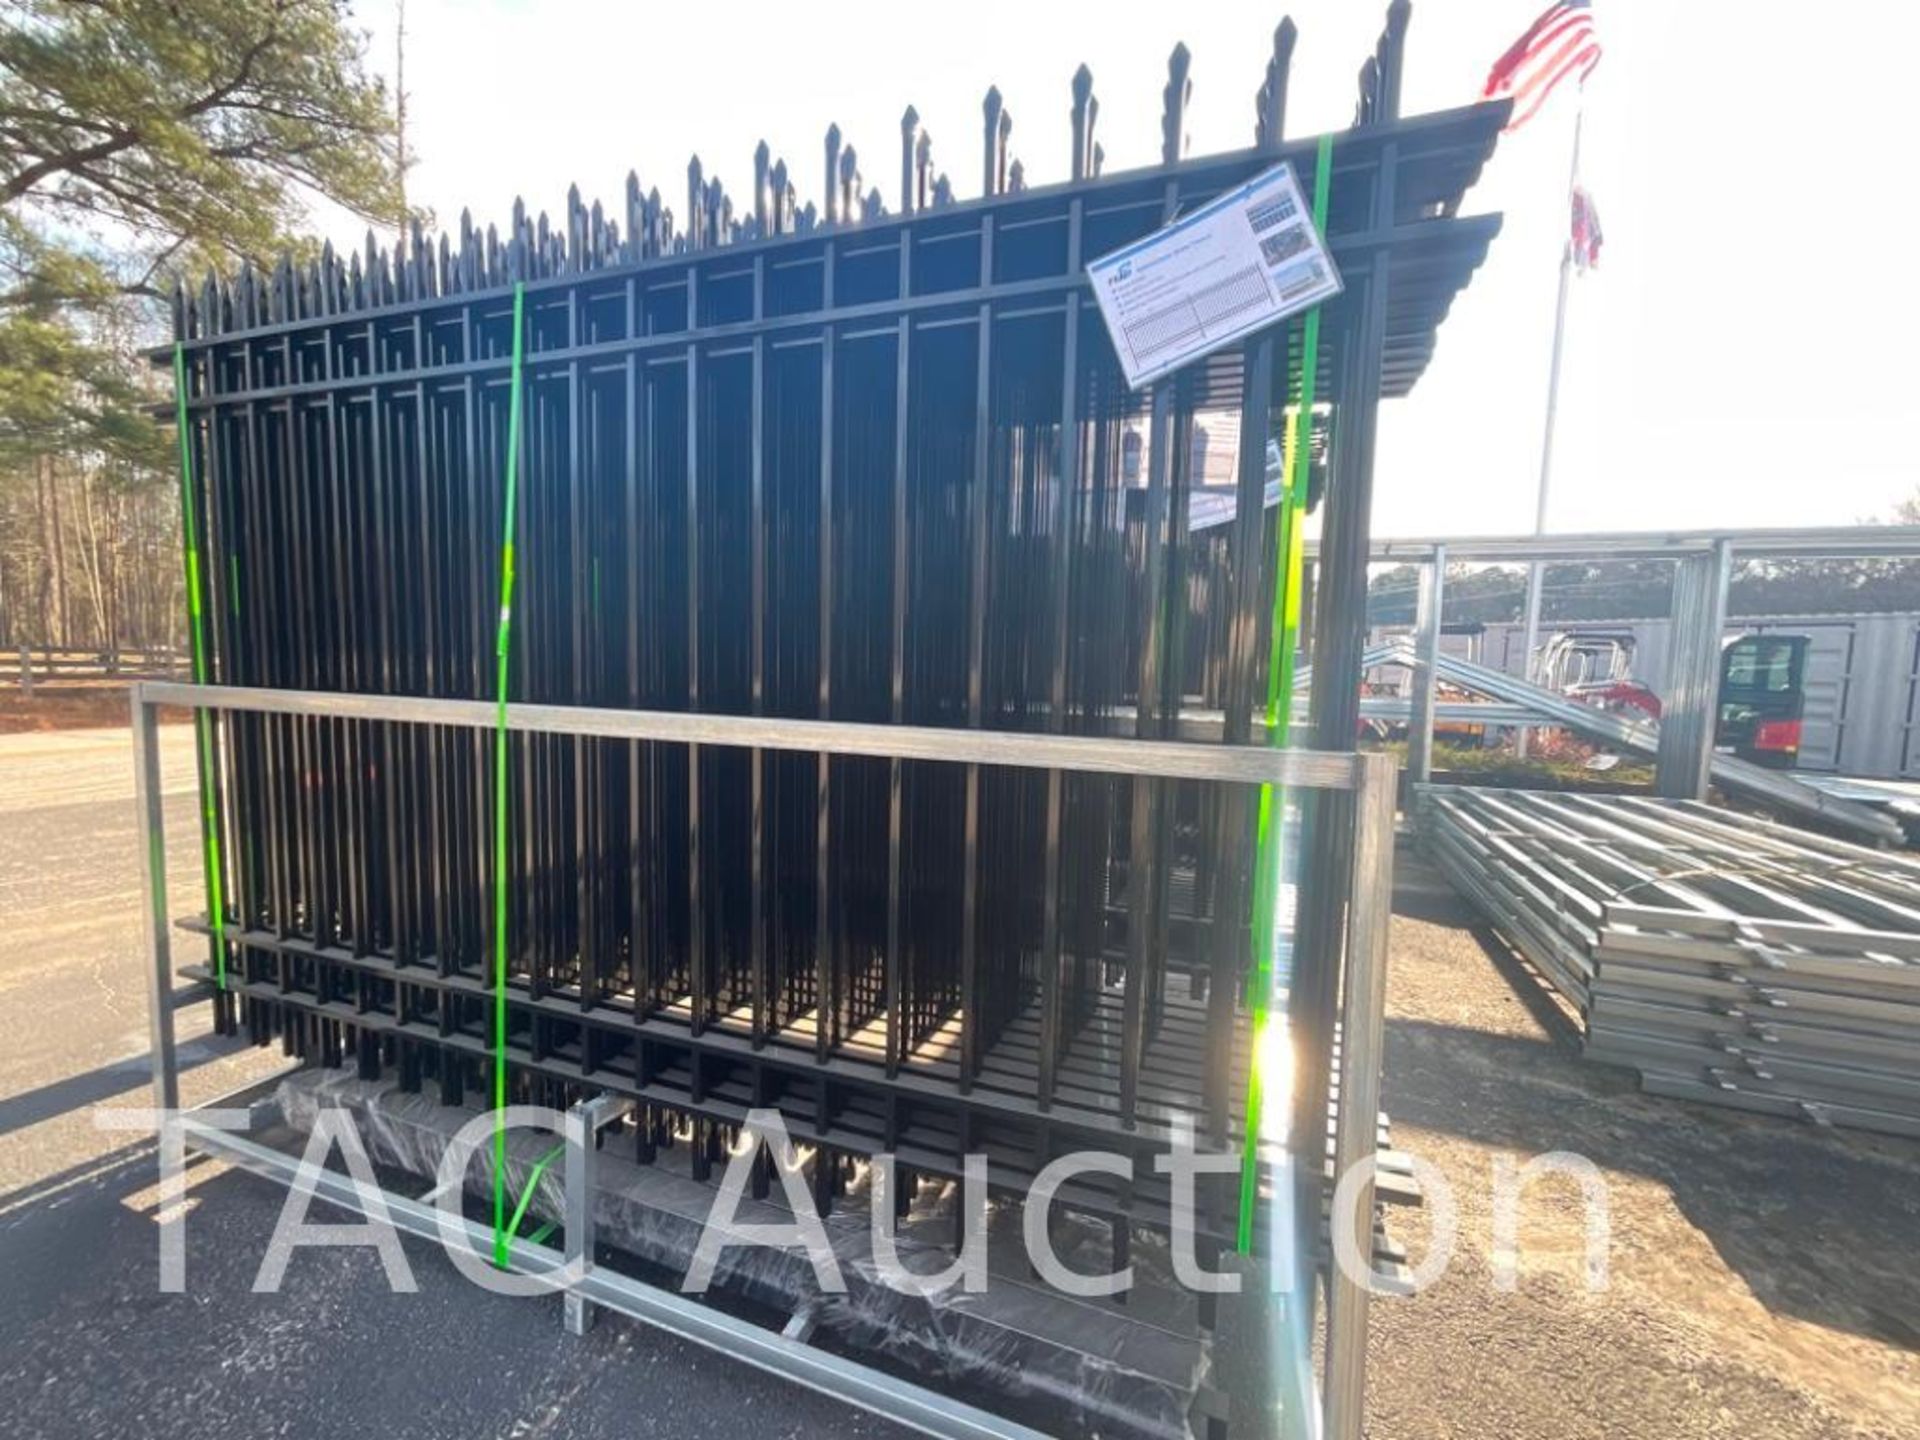 New Powder Coated Galvanized Steel Fencing - Image 2 of 4